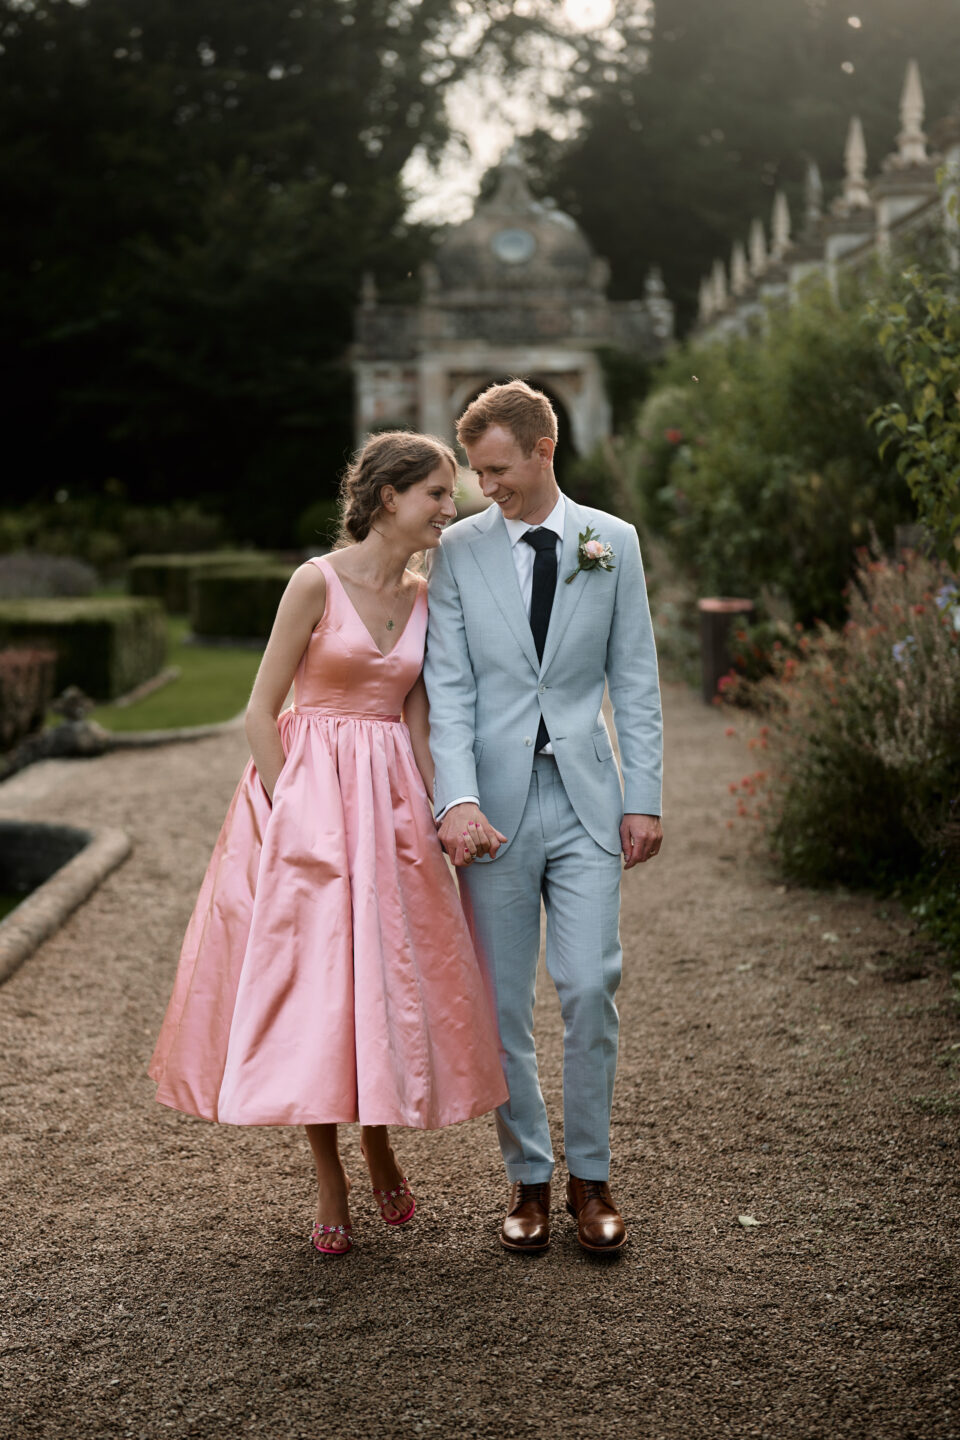 A man and a woman, with the woman wearing a pink dress, are walking down a path. They're getting married.